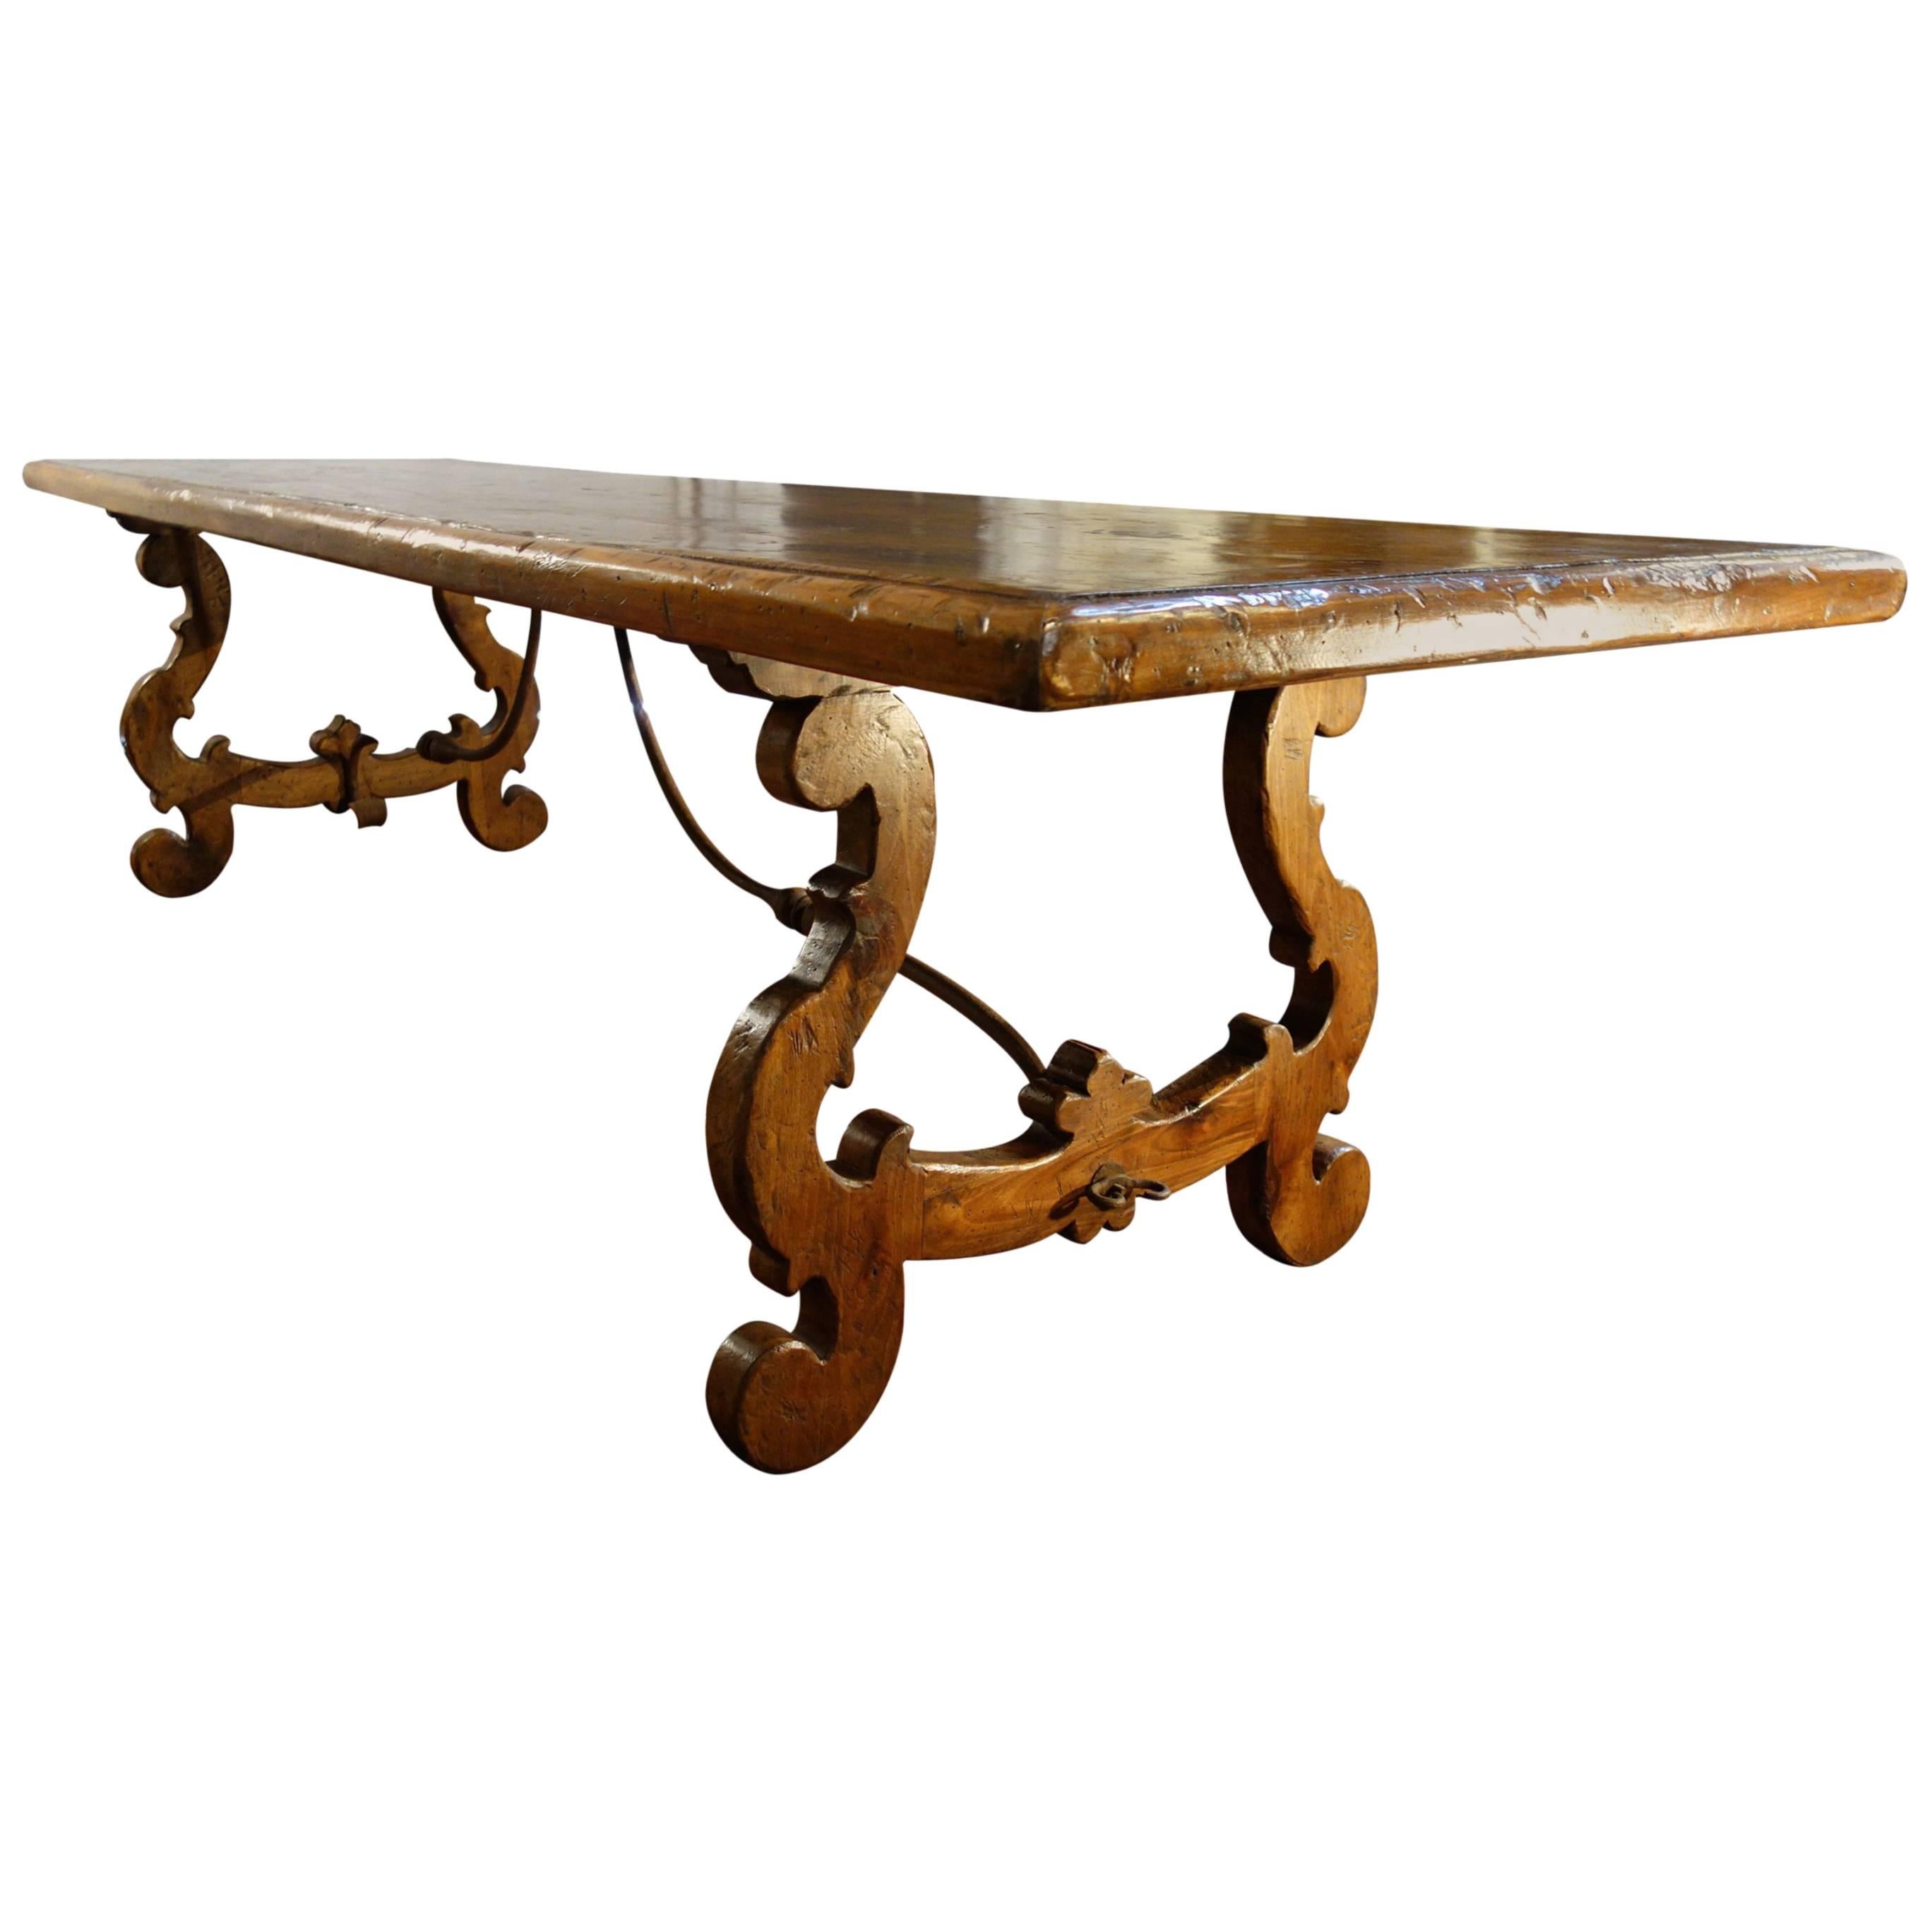 The LIRA refectory table style is adapted from Italian Renaissance designs of the 15th to 19th Centuries. Handcrafted with aged Italian solid hardwoods & hand-forged iron elements and artfully finished in the classic Italian shellac manner by our